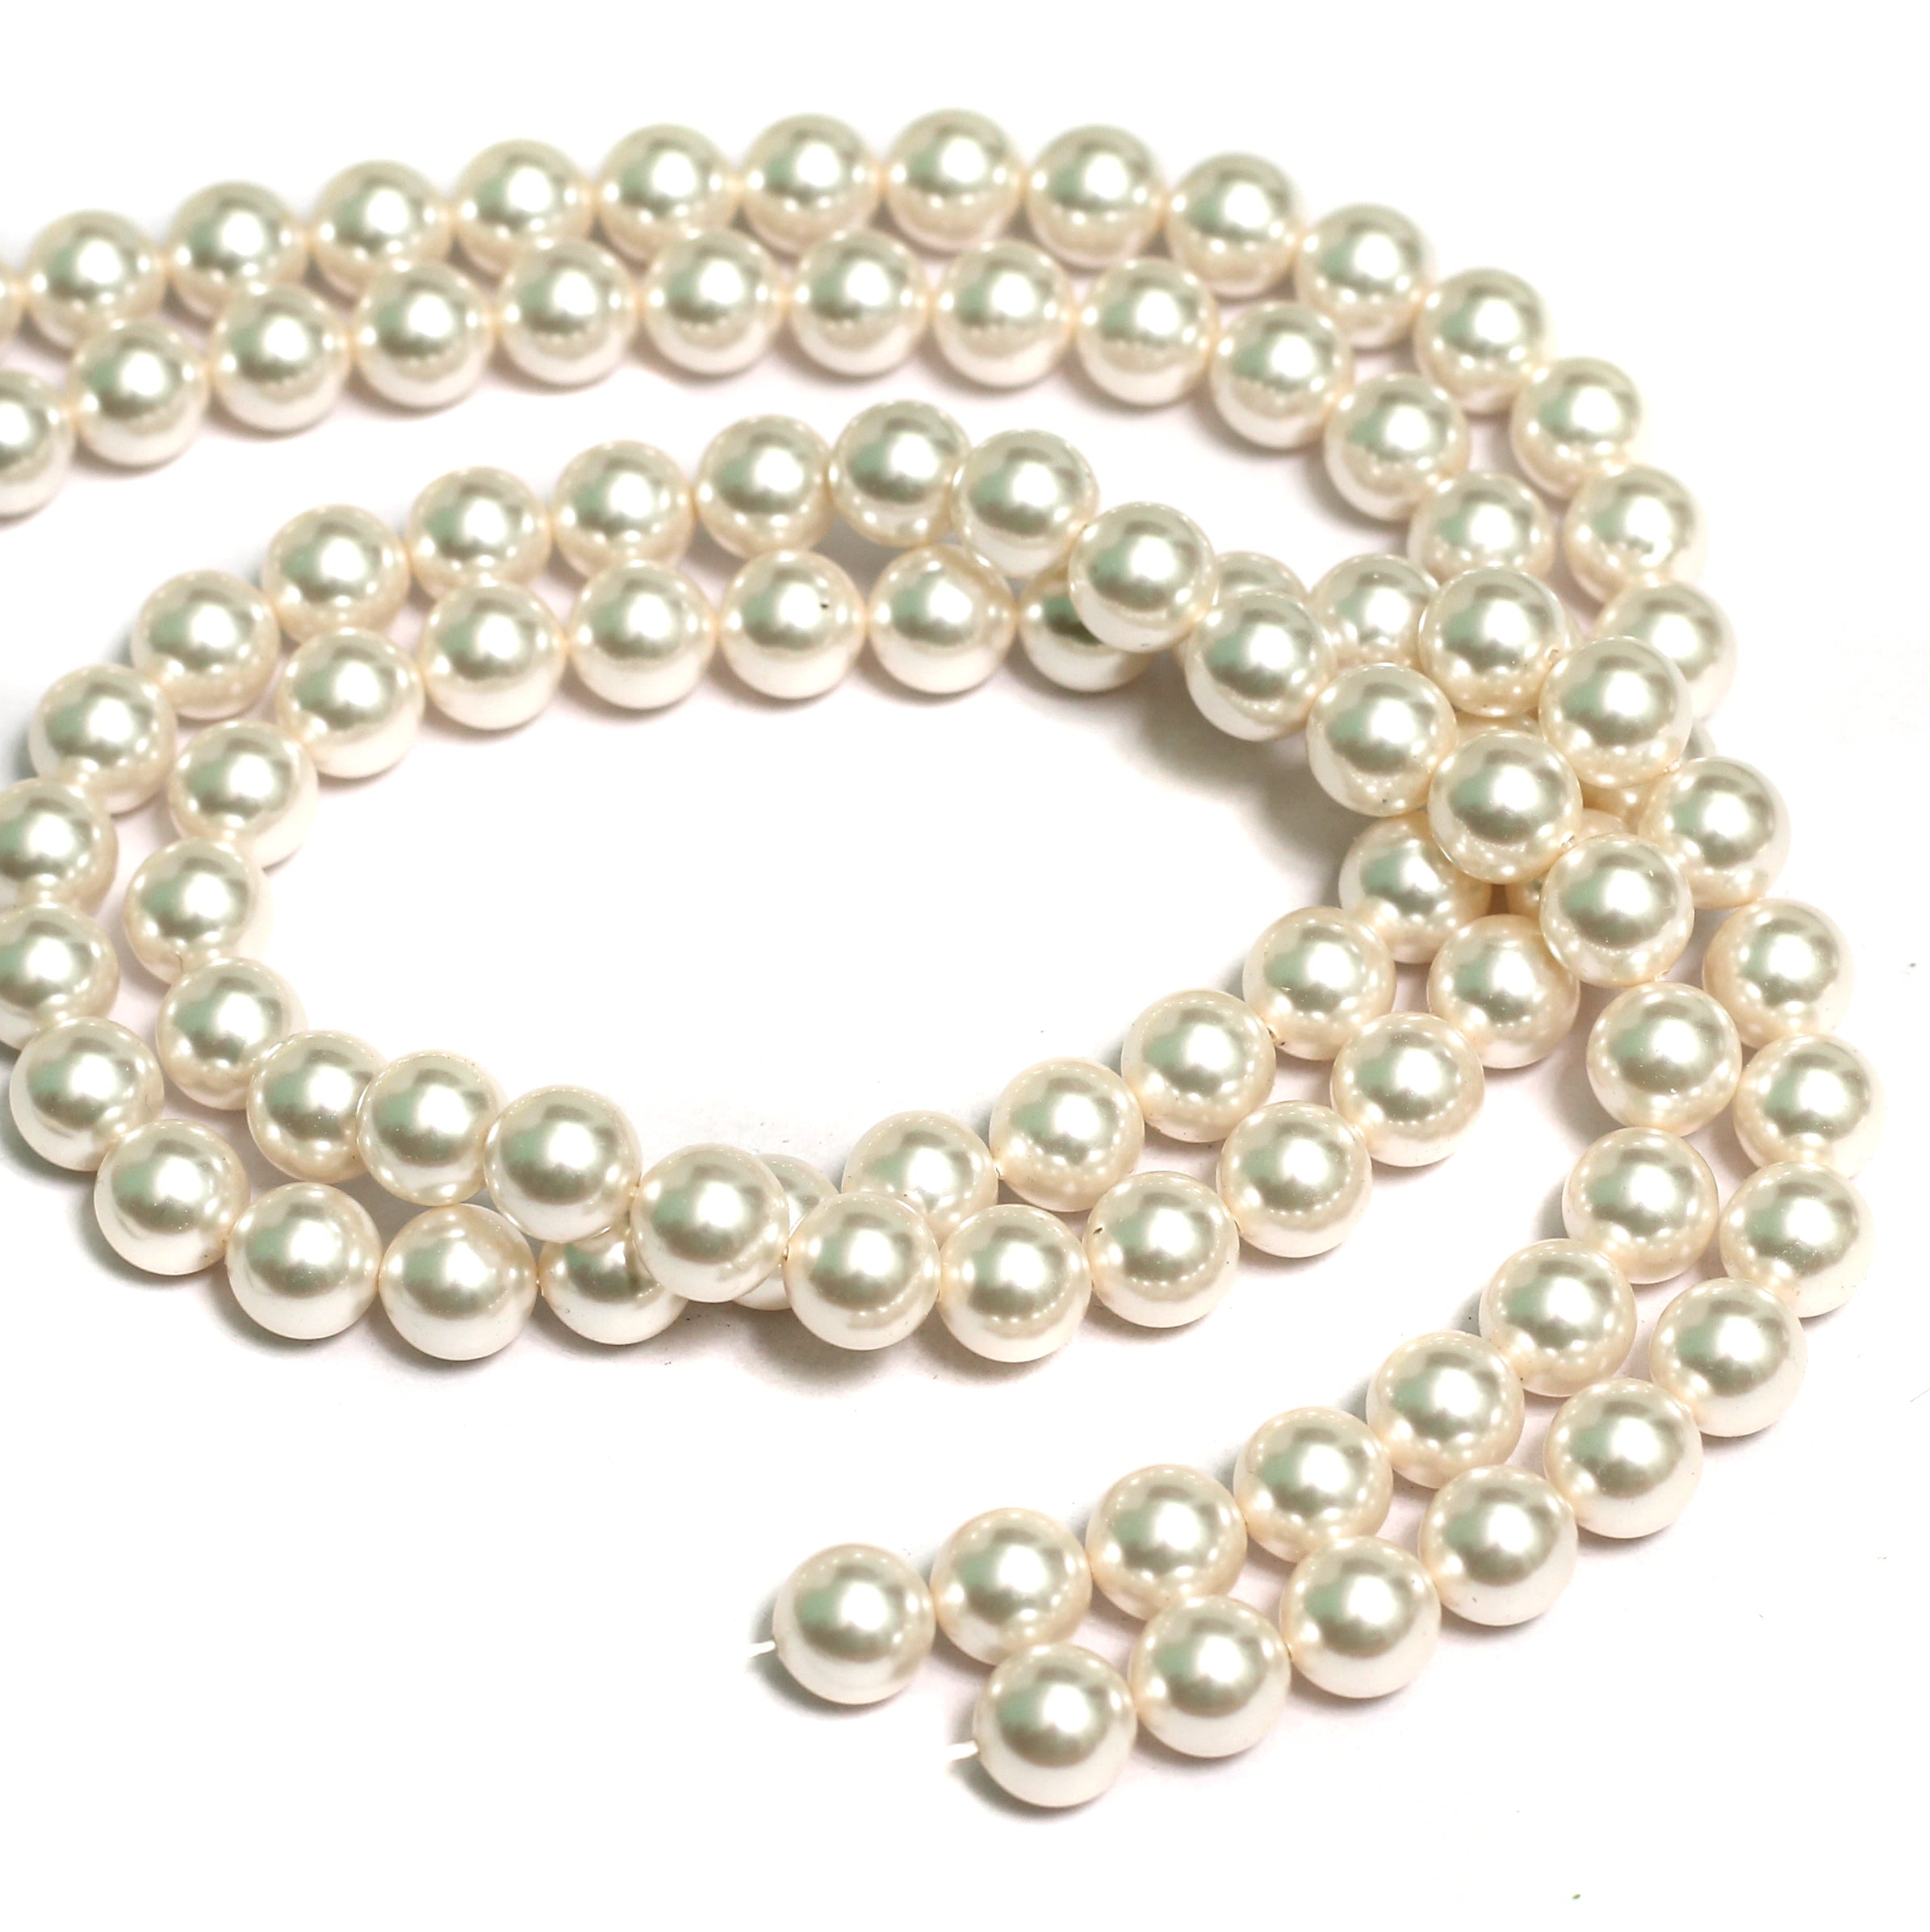 Sooyee Pearl Beads for Craft, 780pcs Ivory Faux Fake Pearls, 10 MM Sew on  Pearl Beads with Holes for Jewelry Making, Bracelets